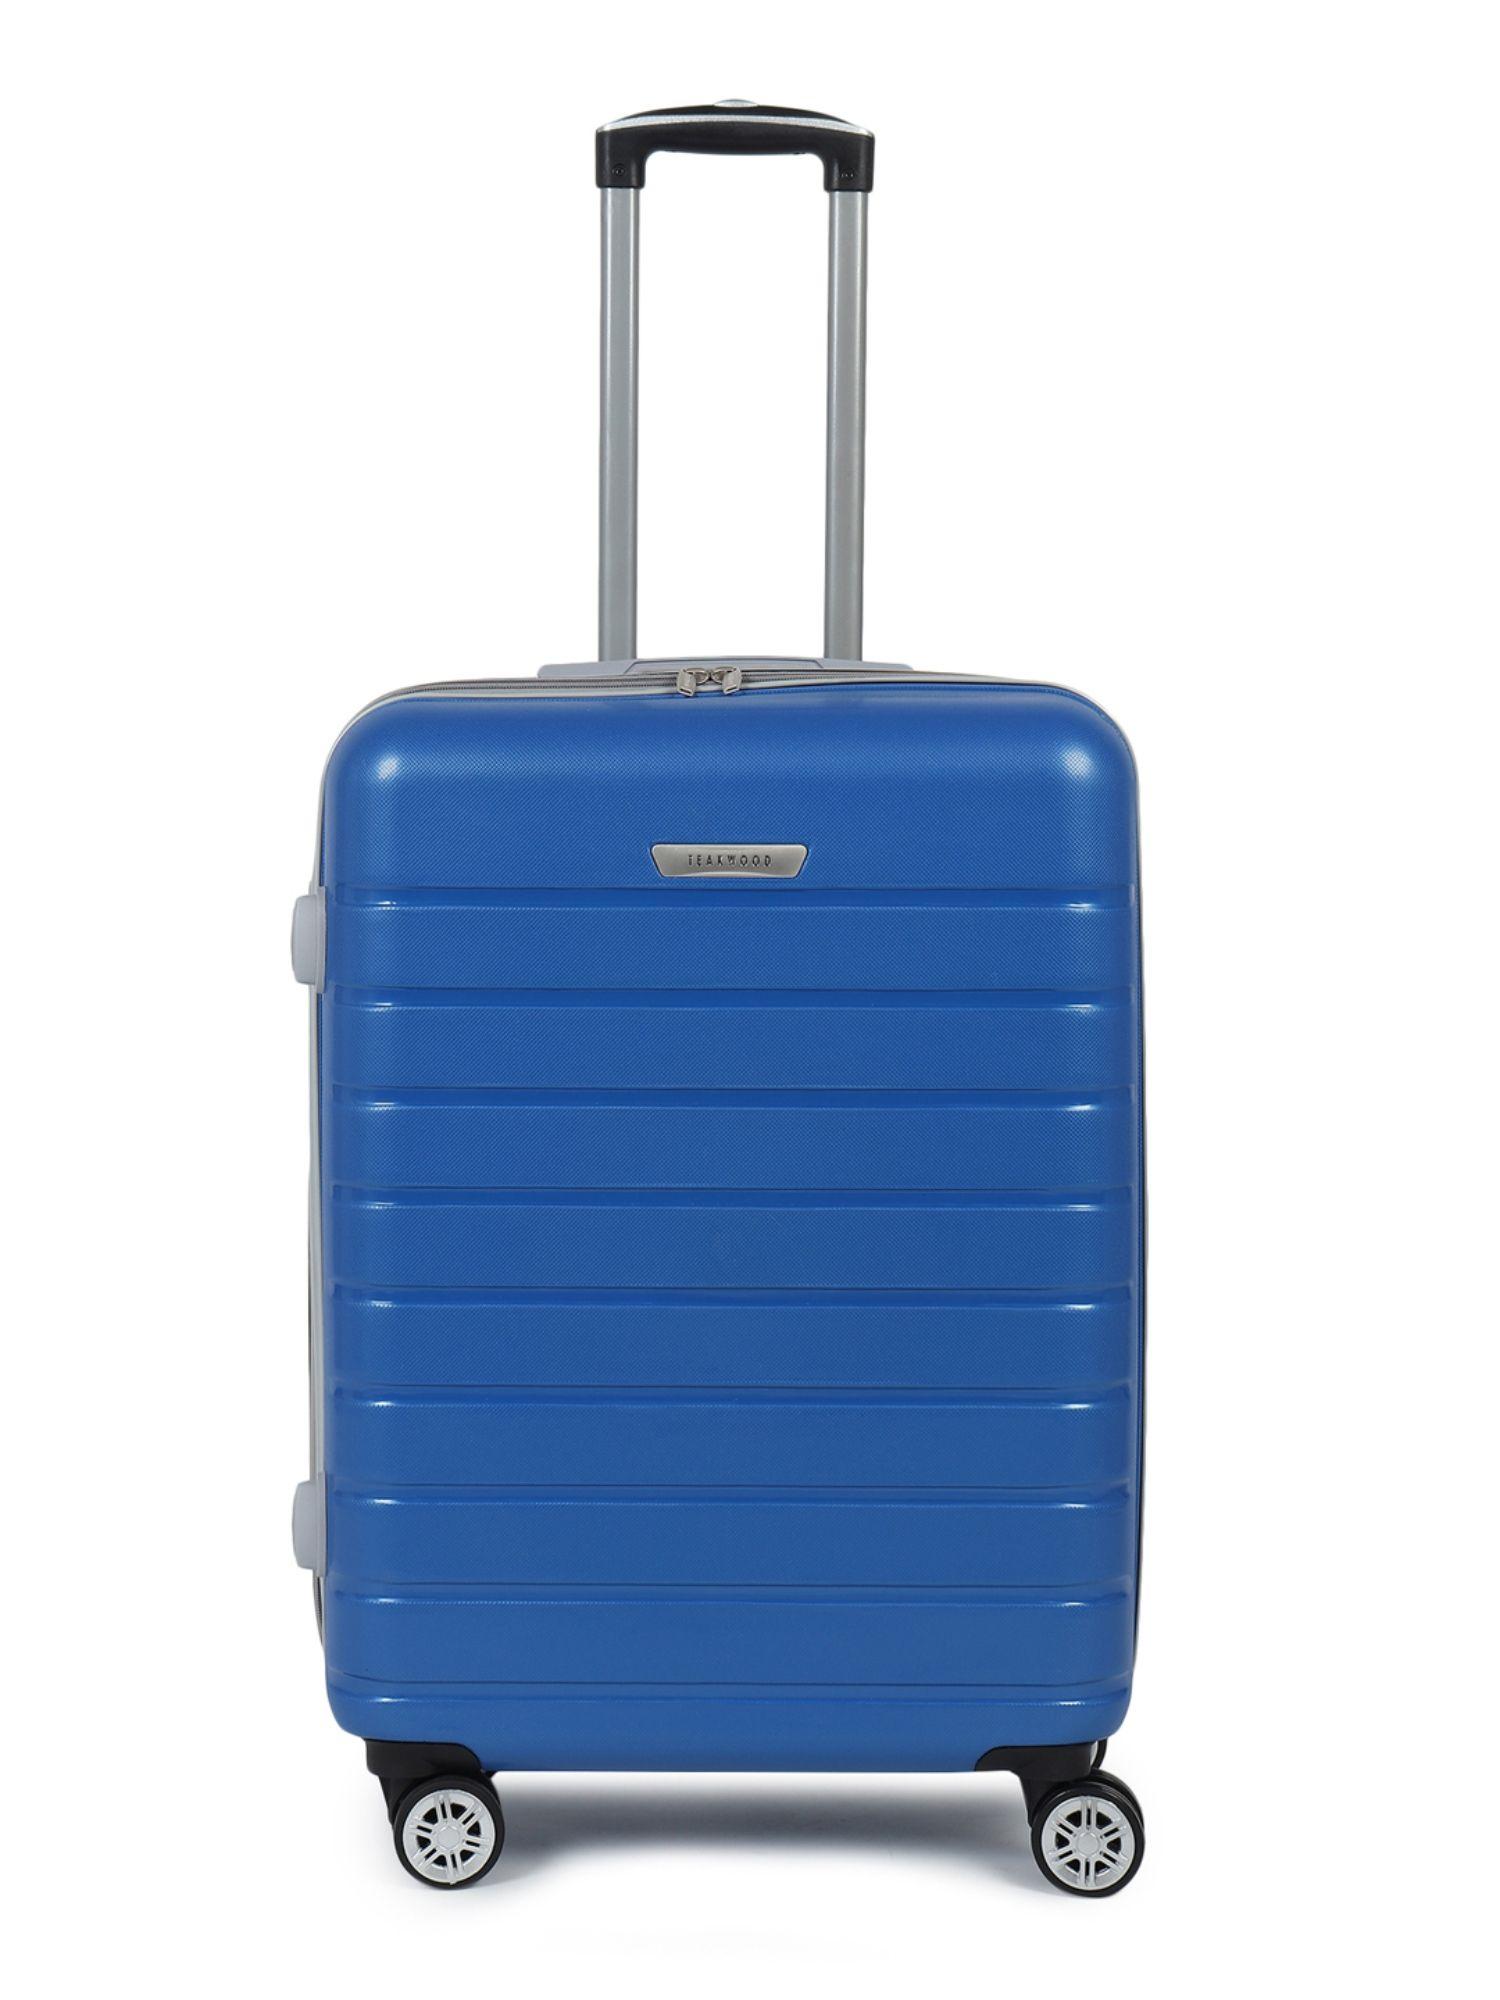 unisex blue textured hard sided medium size check-in trolley bag